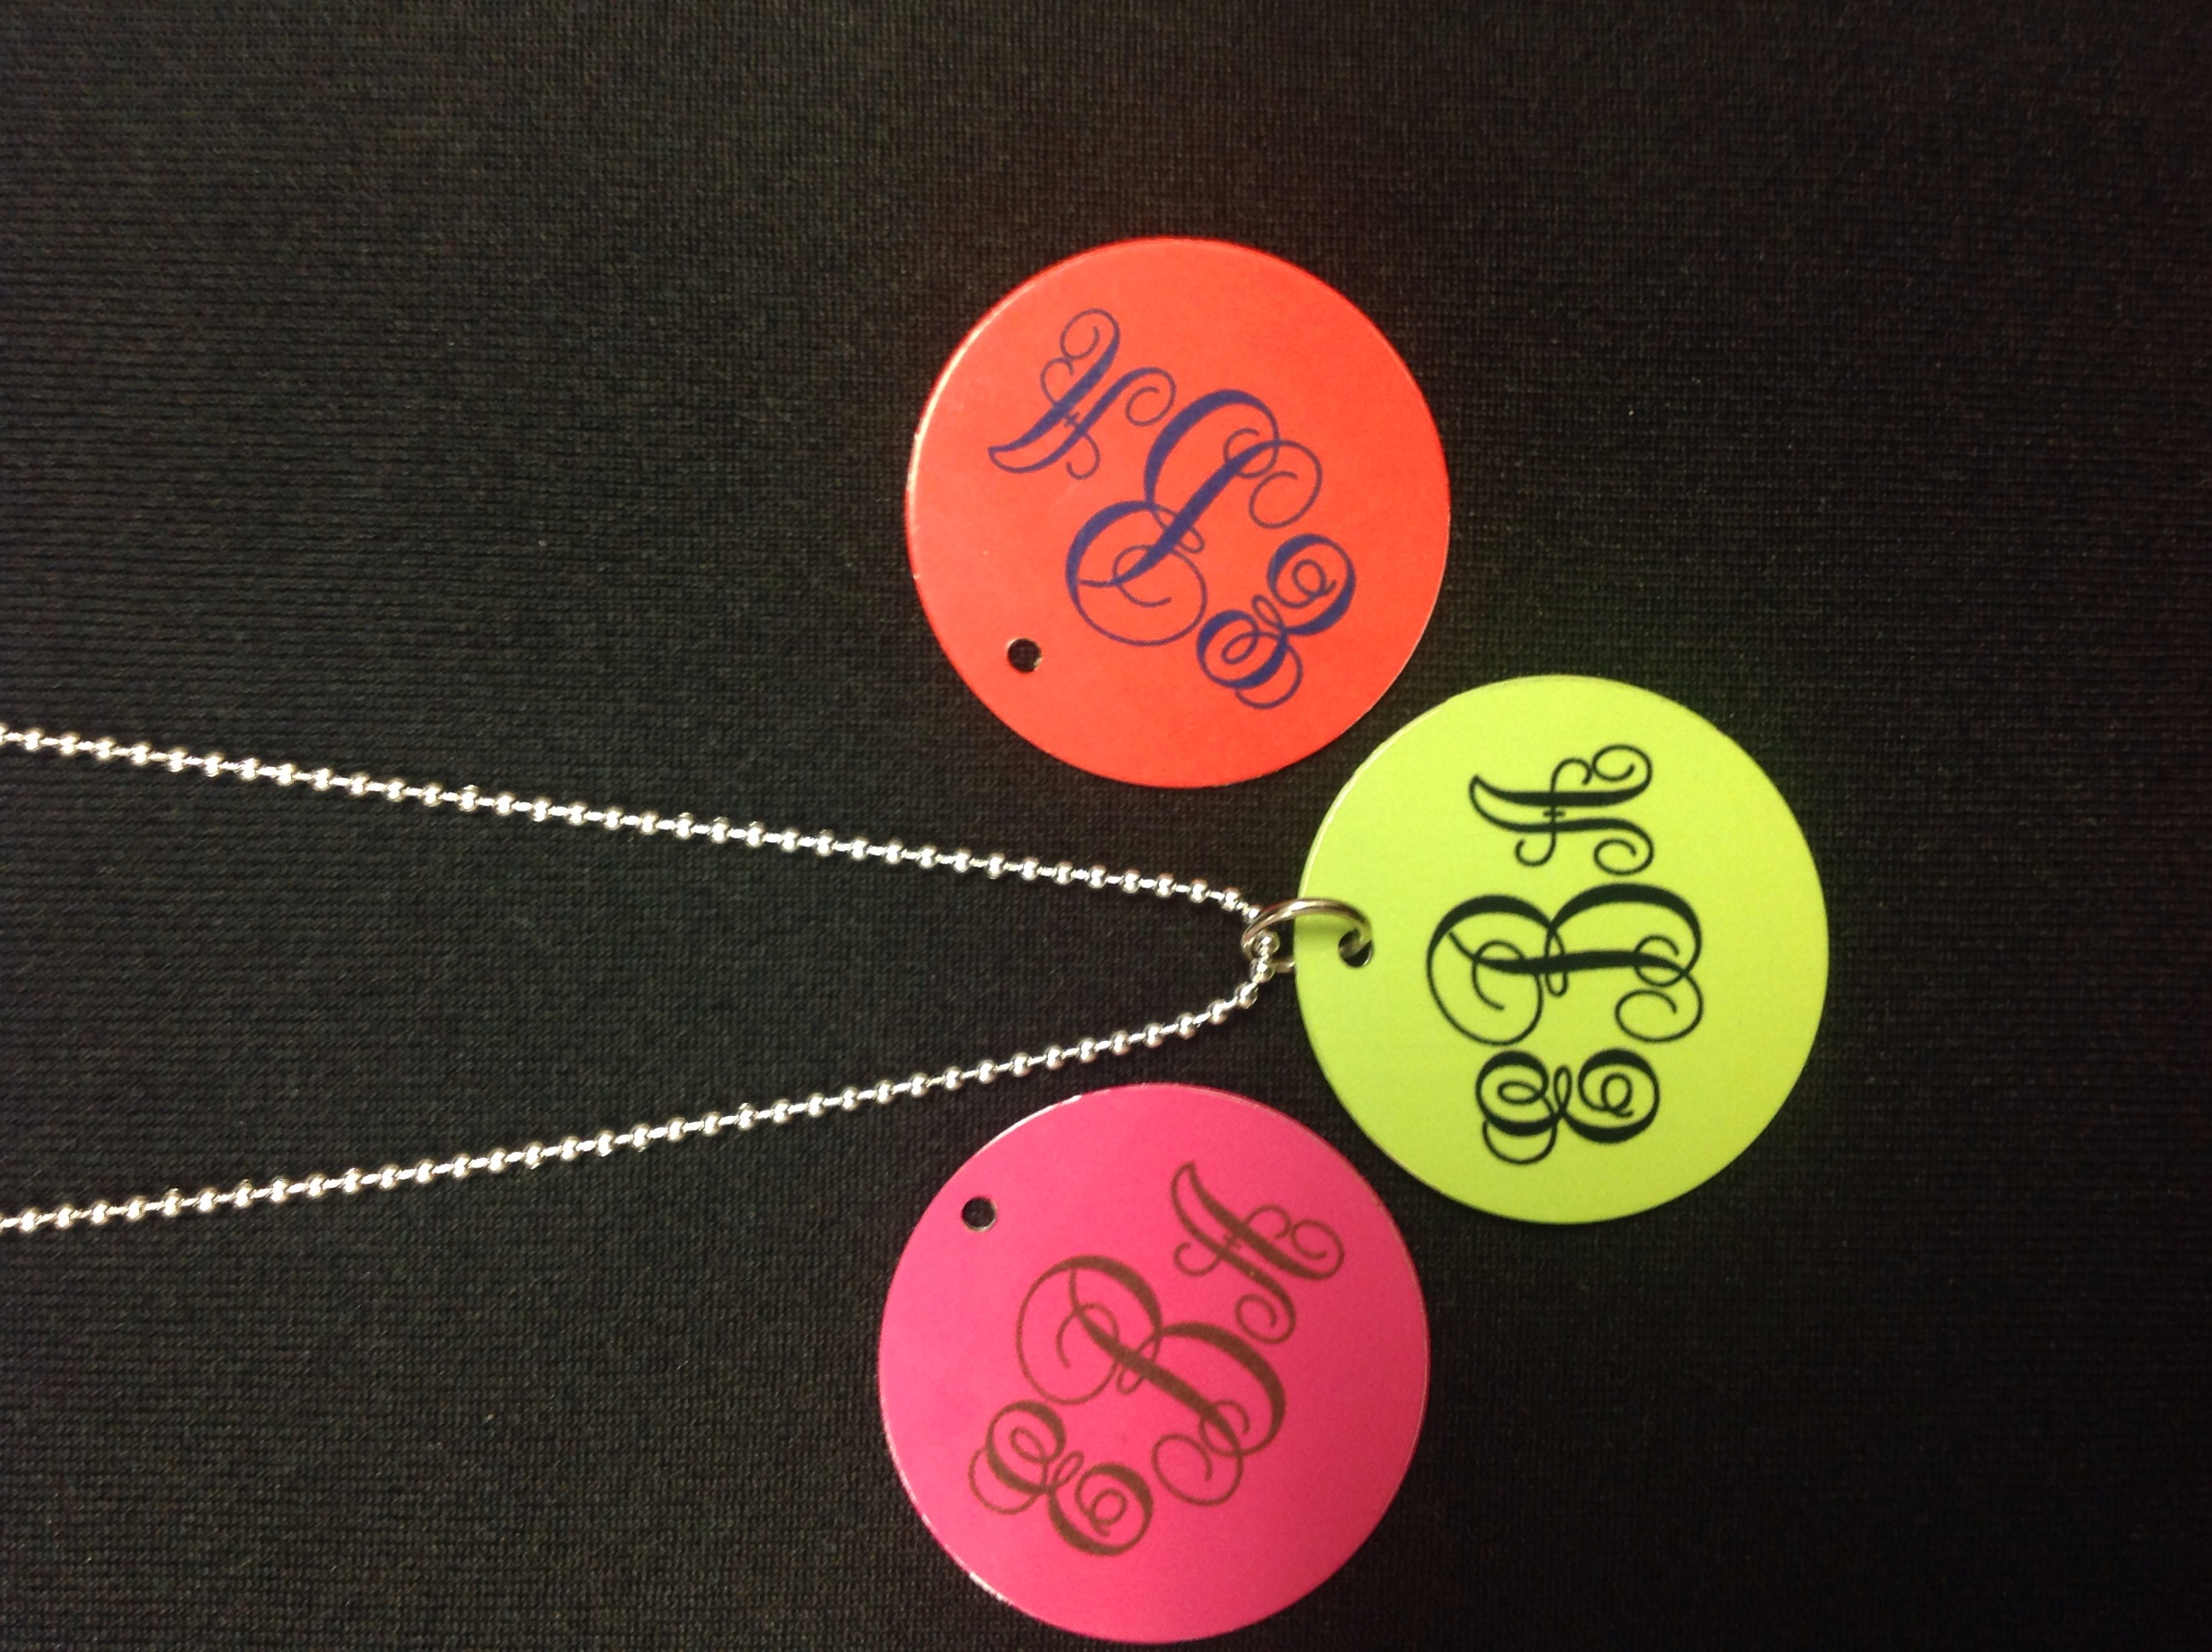 Monogramed Jewelry made with sublimation printing